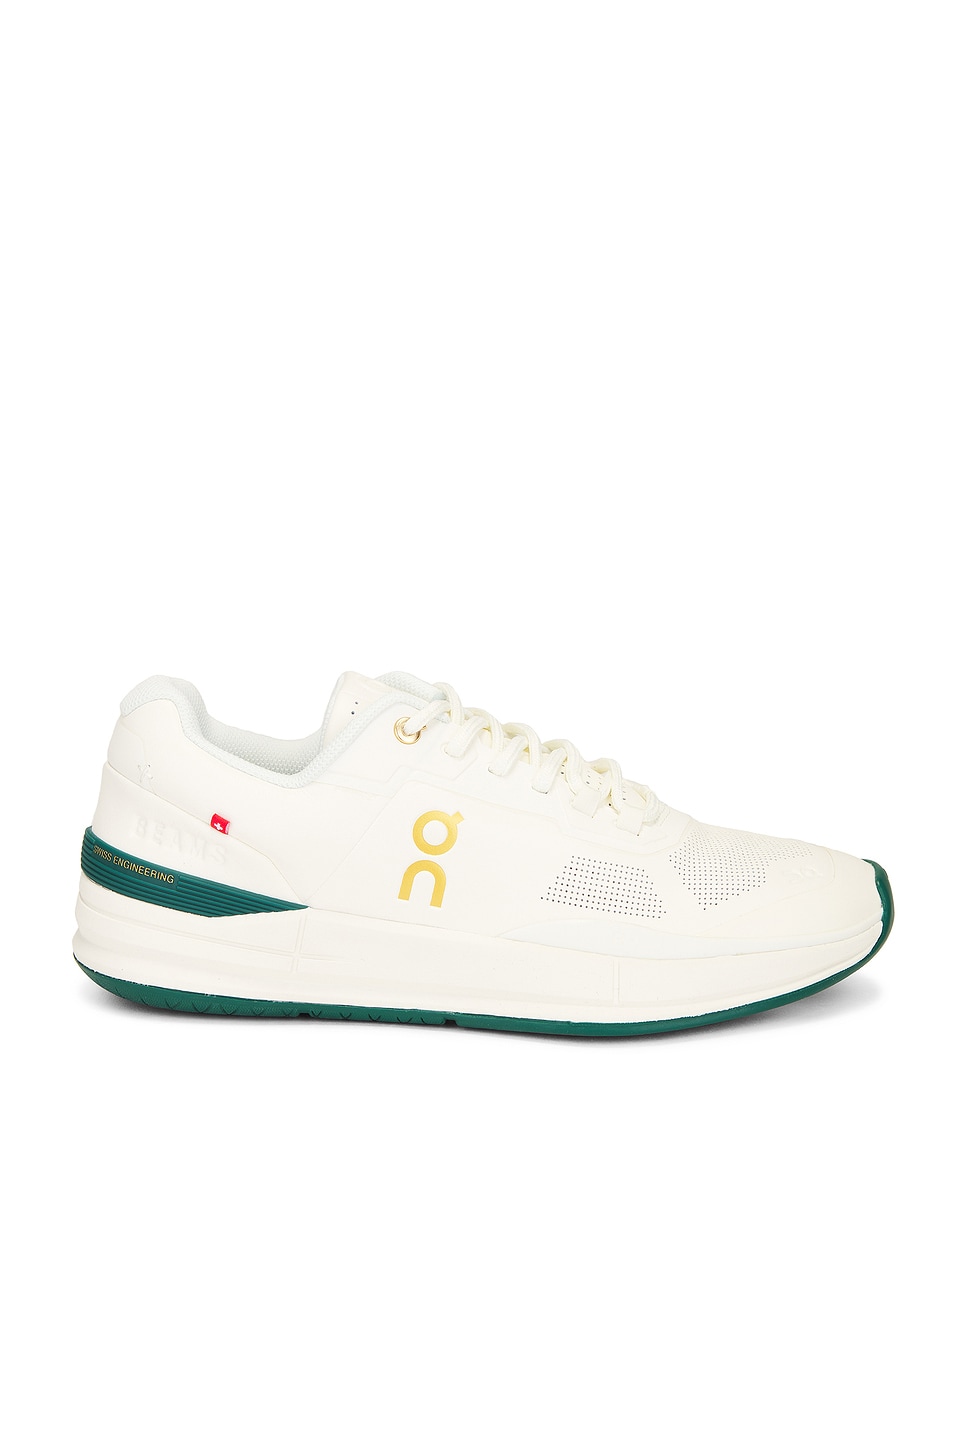 Image 1 of On x BEAMS Japan The Roger Pro Sneaker in Ivory